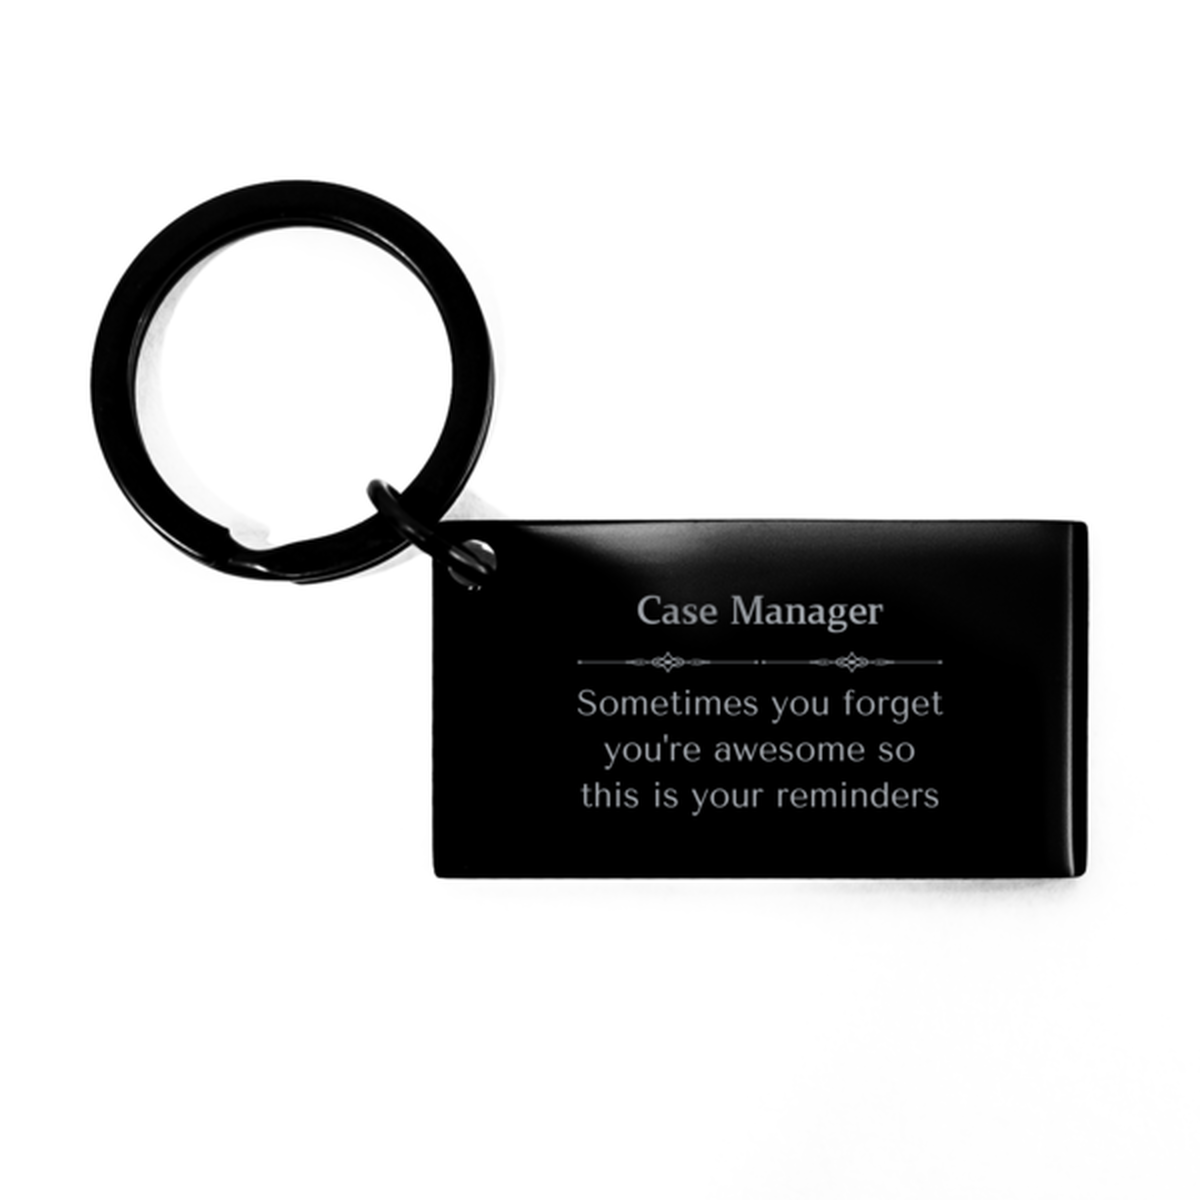 Sentimental Case Manager Keychain, Dentist Sometimes you forget you're awesome so this is your reminders, Graduation Christmas Birthday Gifts for Case Manager, Men, Women, Coworkers